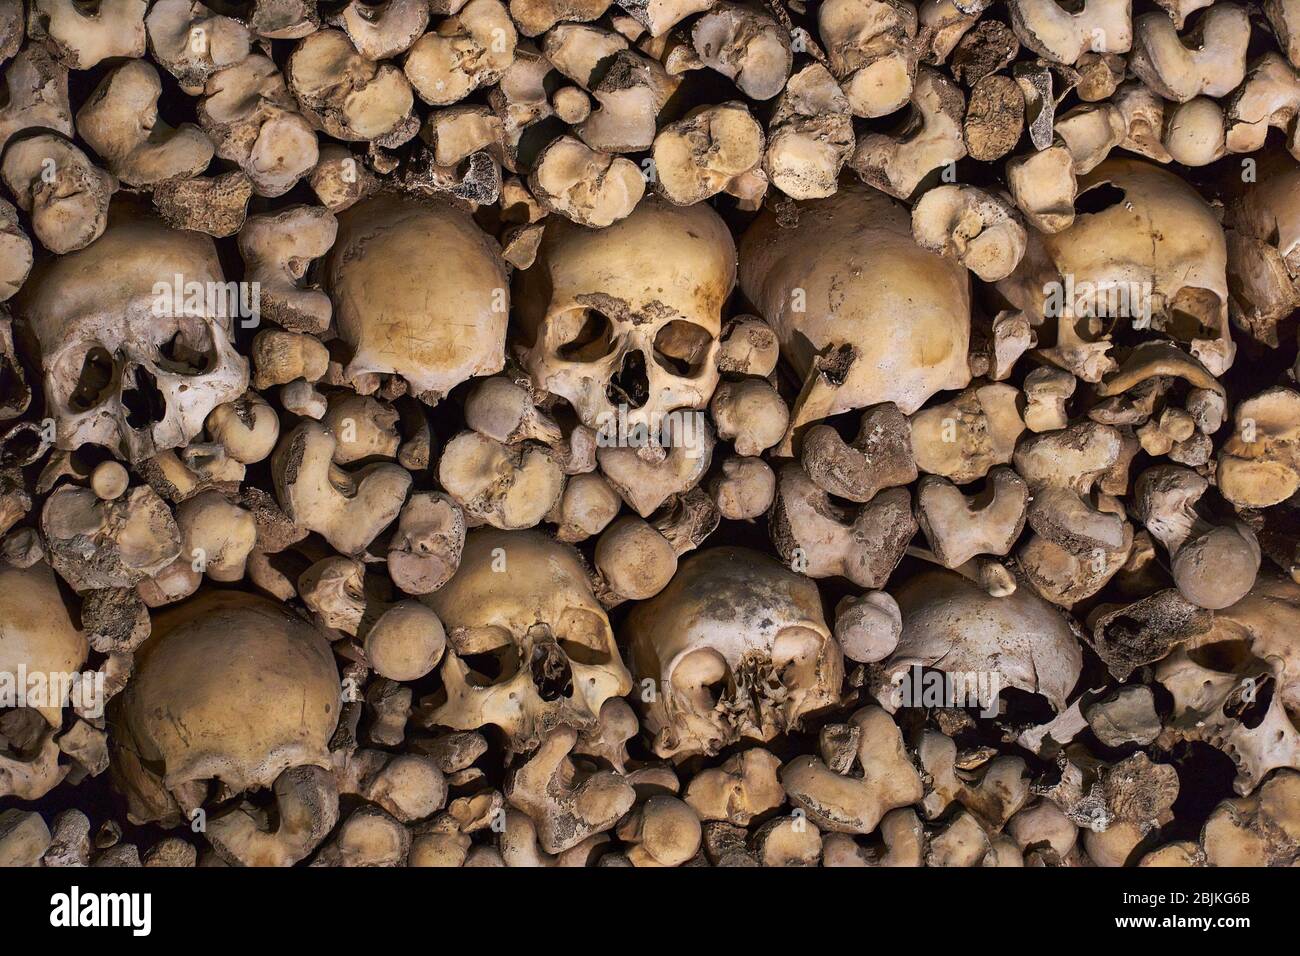 remains of human bones embedded in the wall. Stock Photo